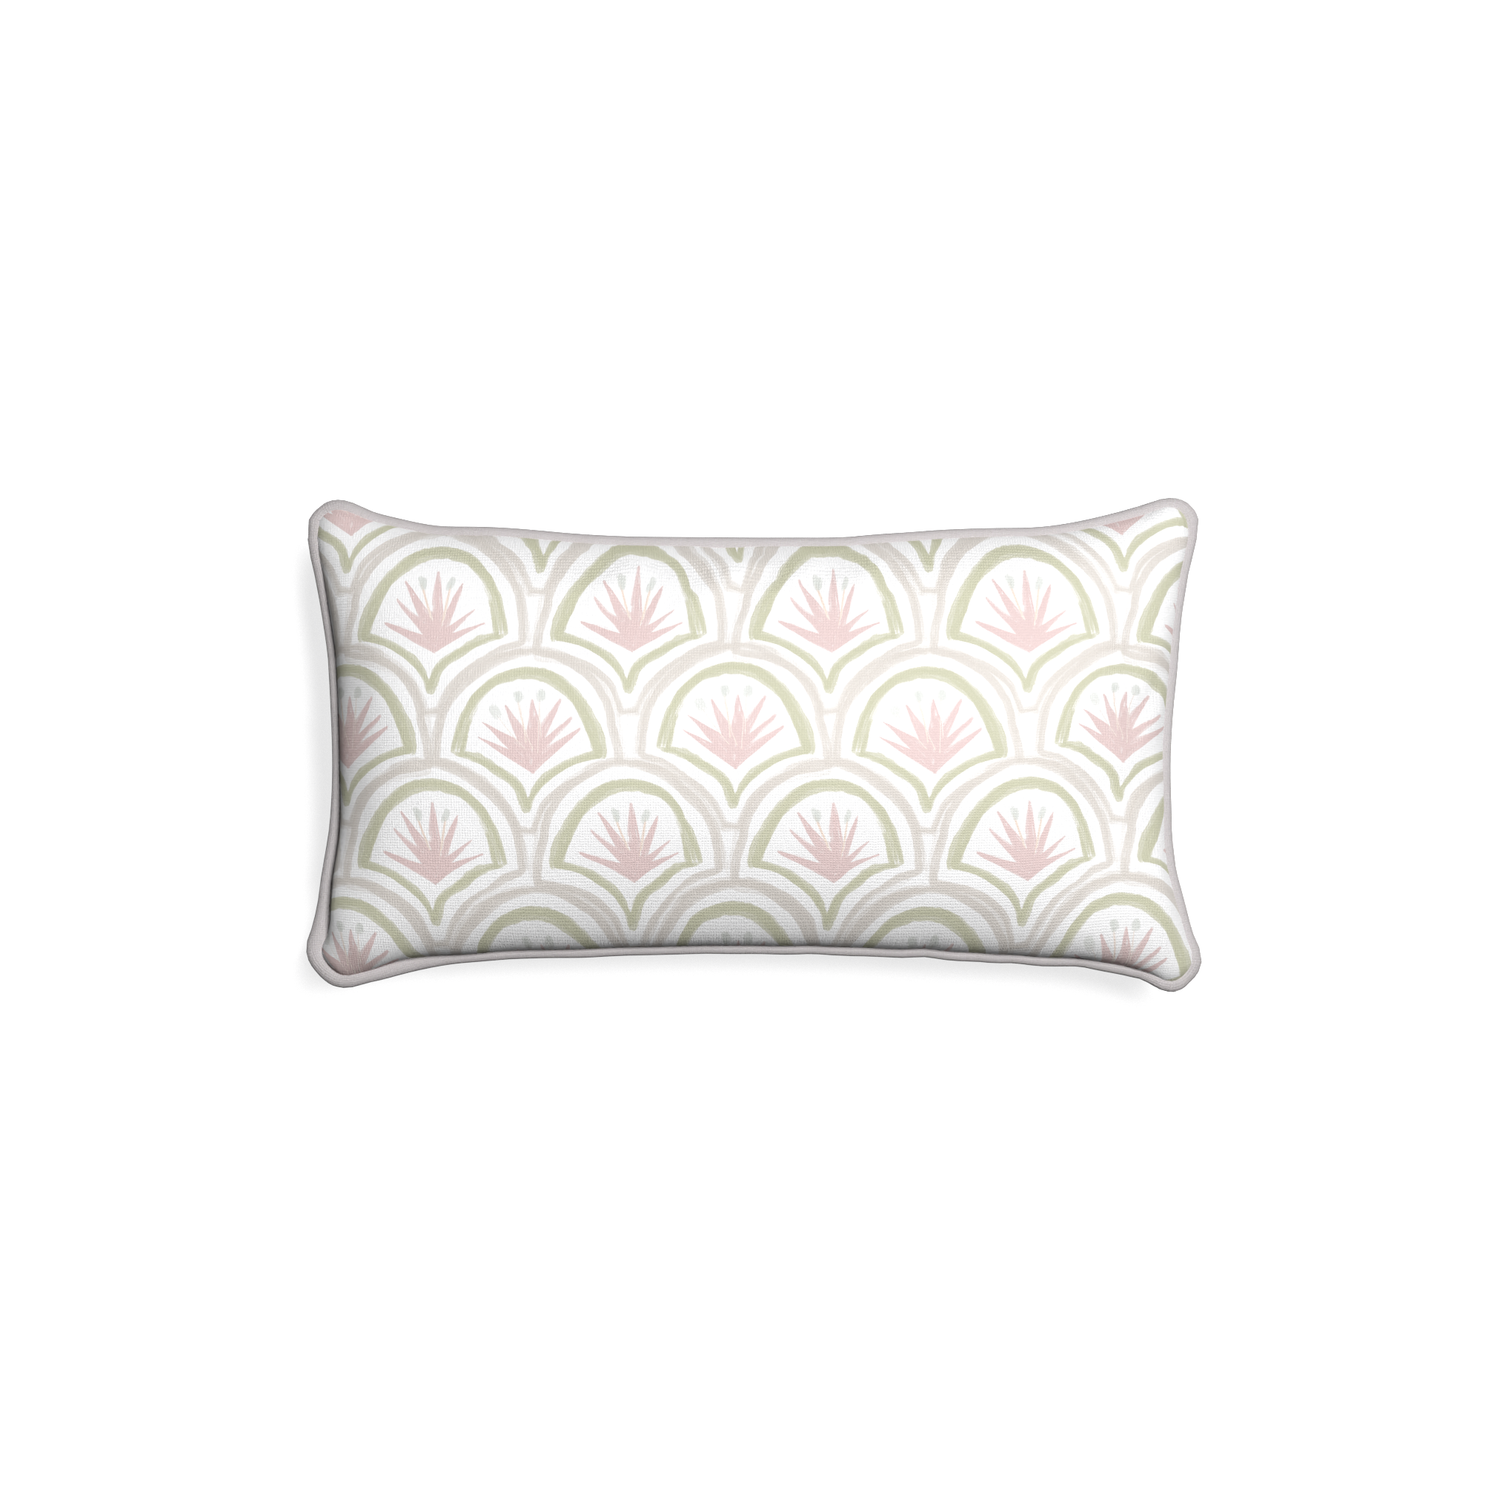 Petite-lumbar thatcher rose custom pink & green palmpillow with pebble piping on white background